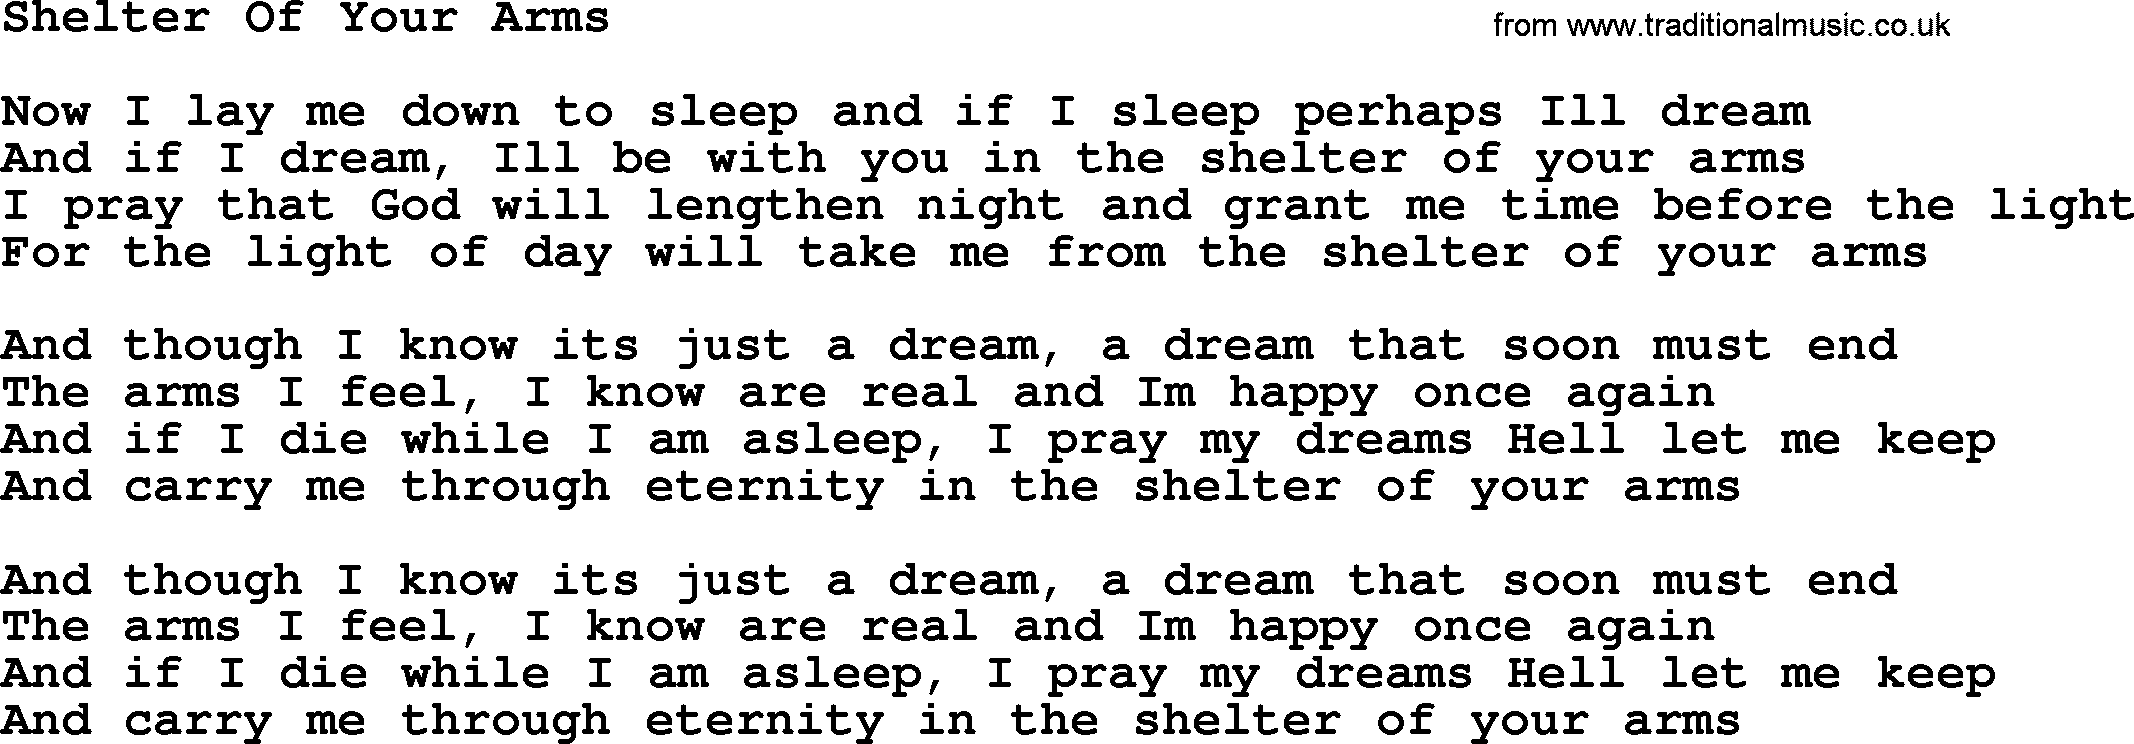 Willie Nelson song: Shelter Of Your Arms lyrics